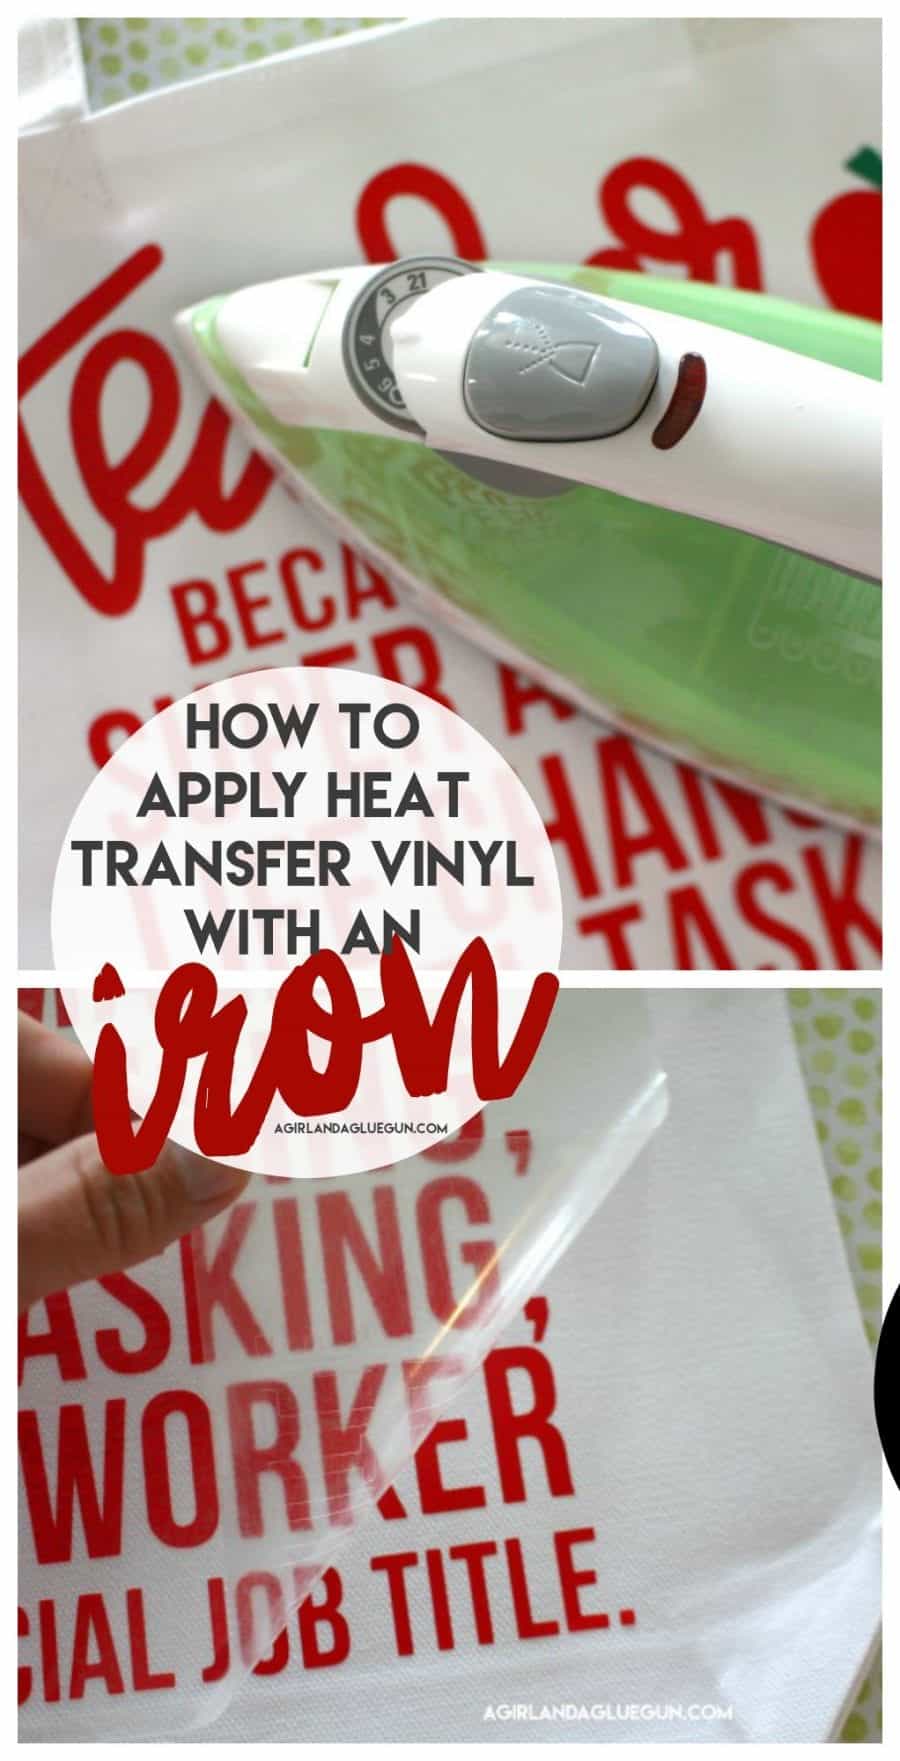 How to apply Heat transfer vinyl with an Iron! - A girl and a glue gun